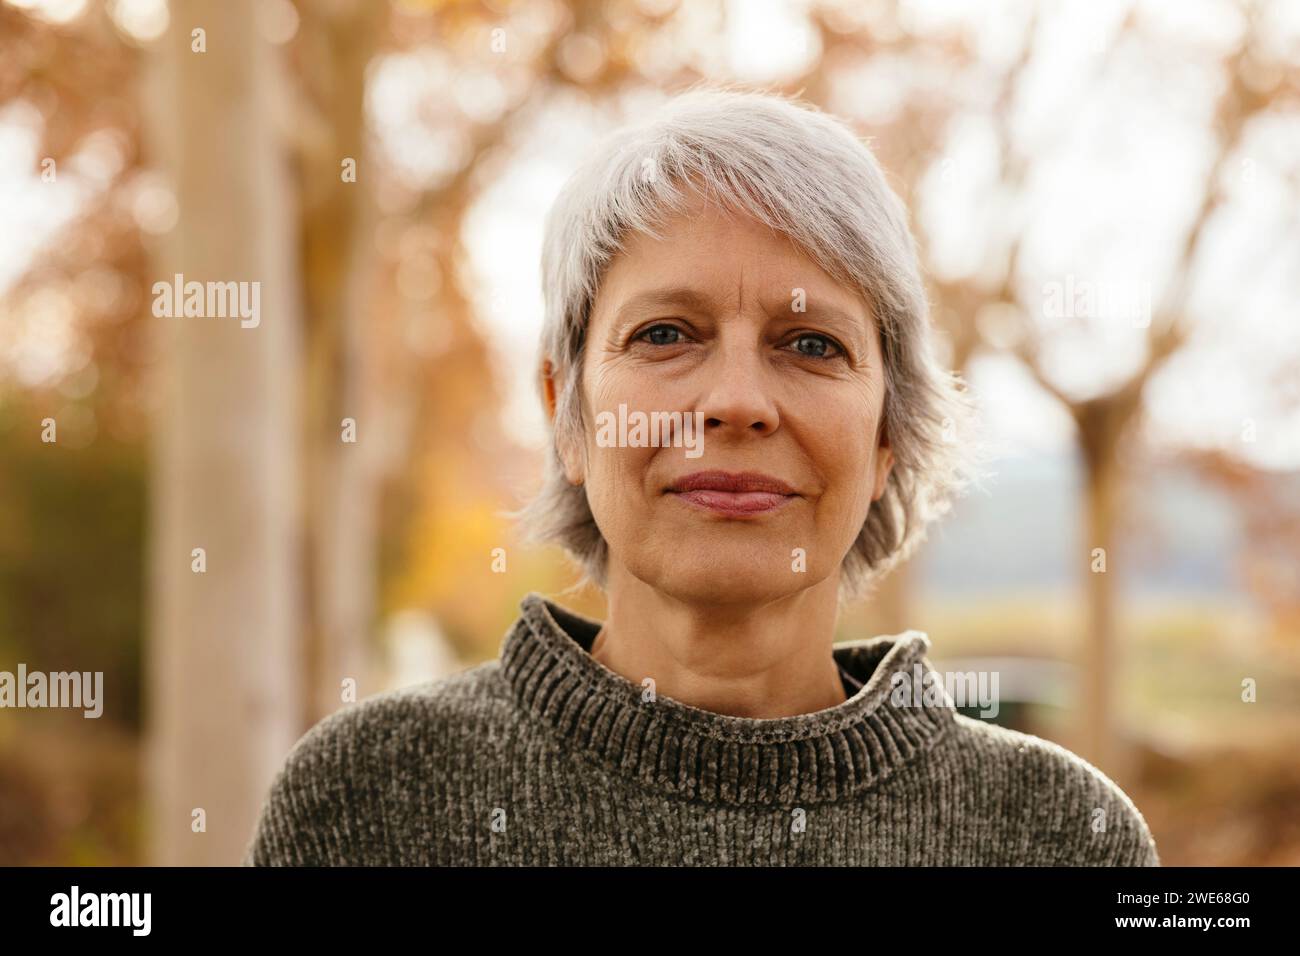 Smiling mature woman with short gray hair Stock Photo